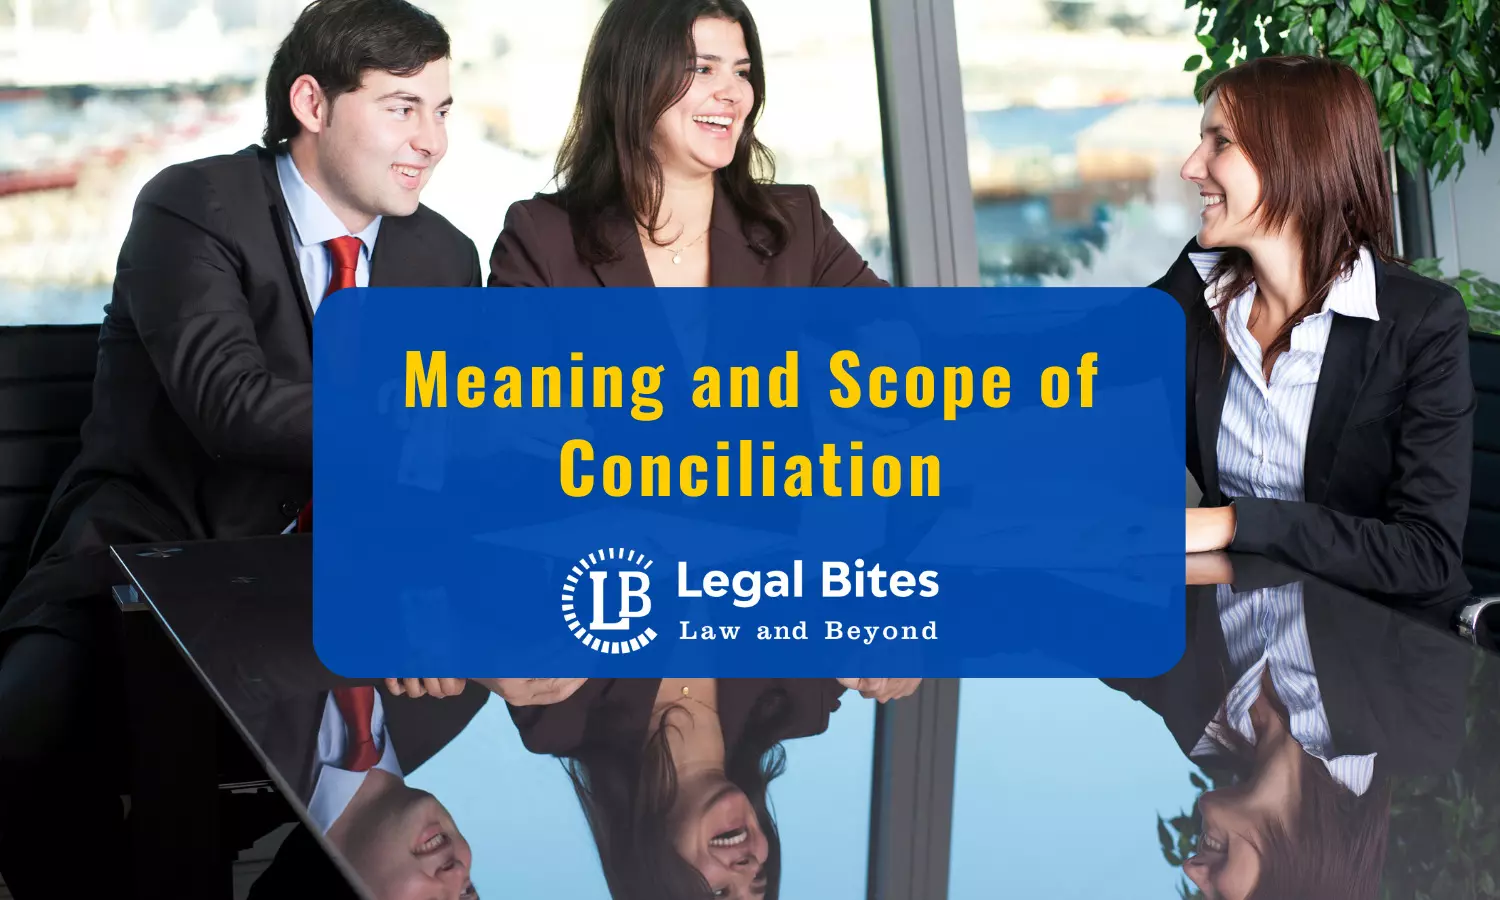 Meaning and Scope of Conciliation